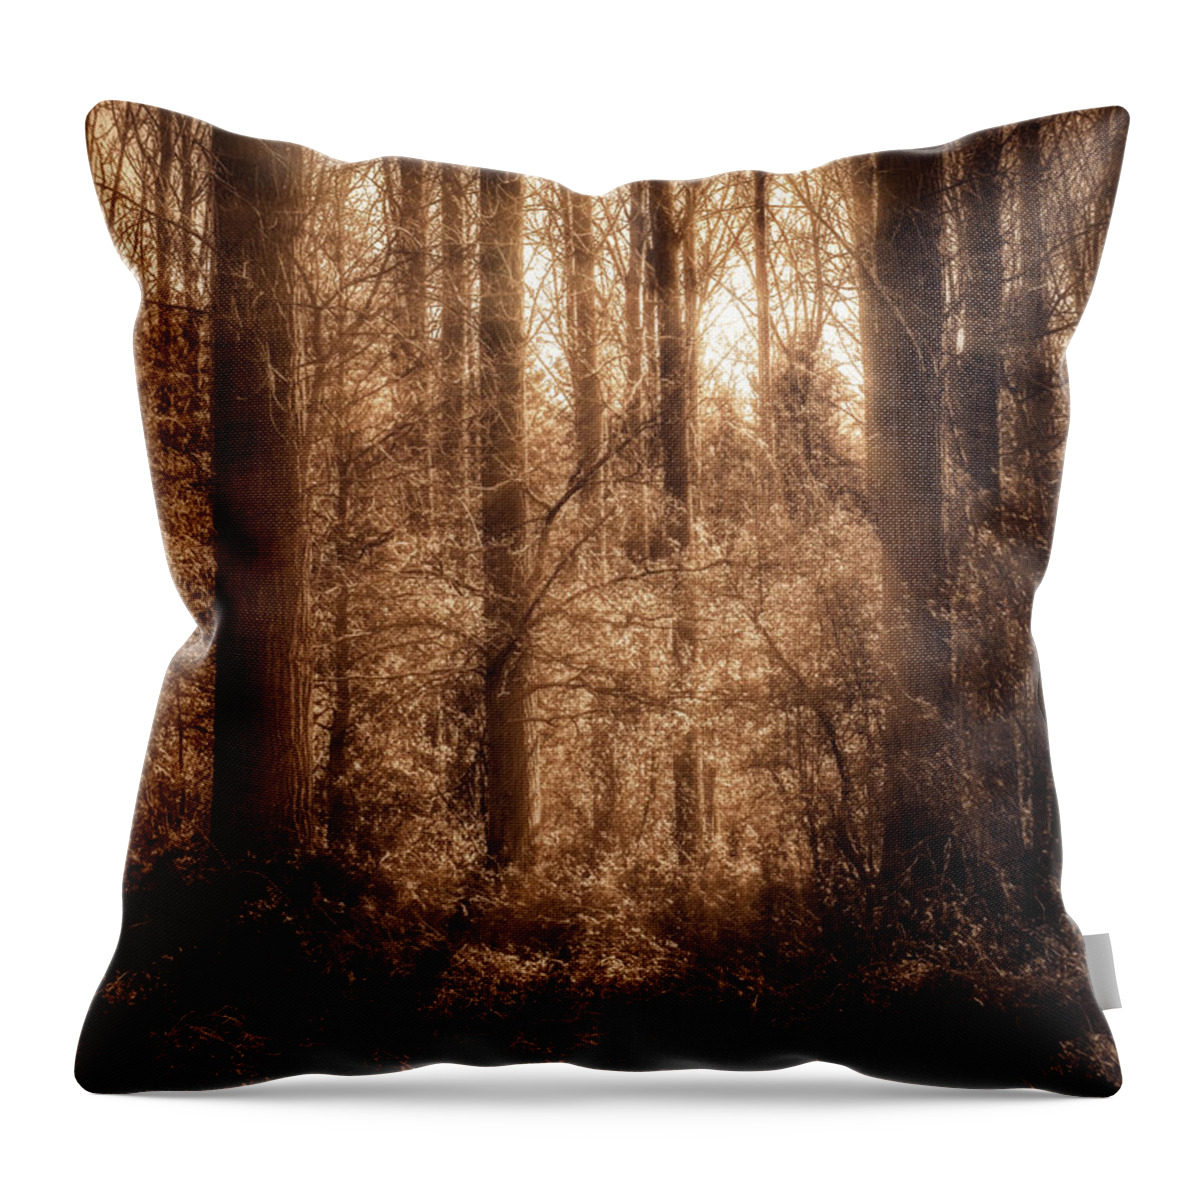 Forest Throw Pillow featuring the photograph Light Trough The Forest by Wim Lanclus